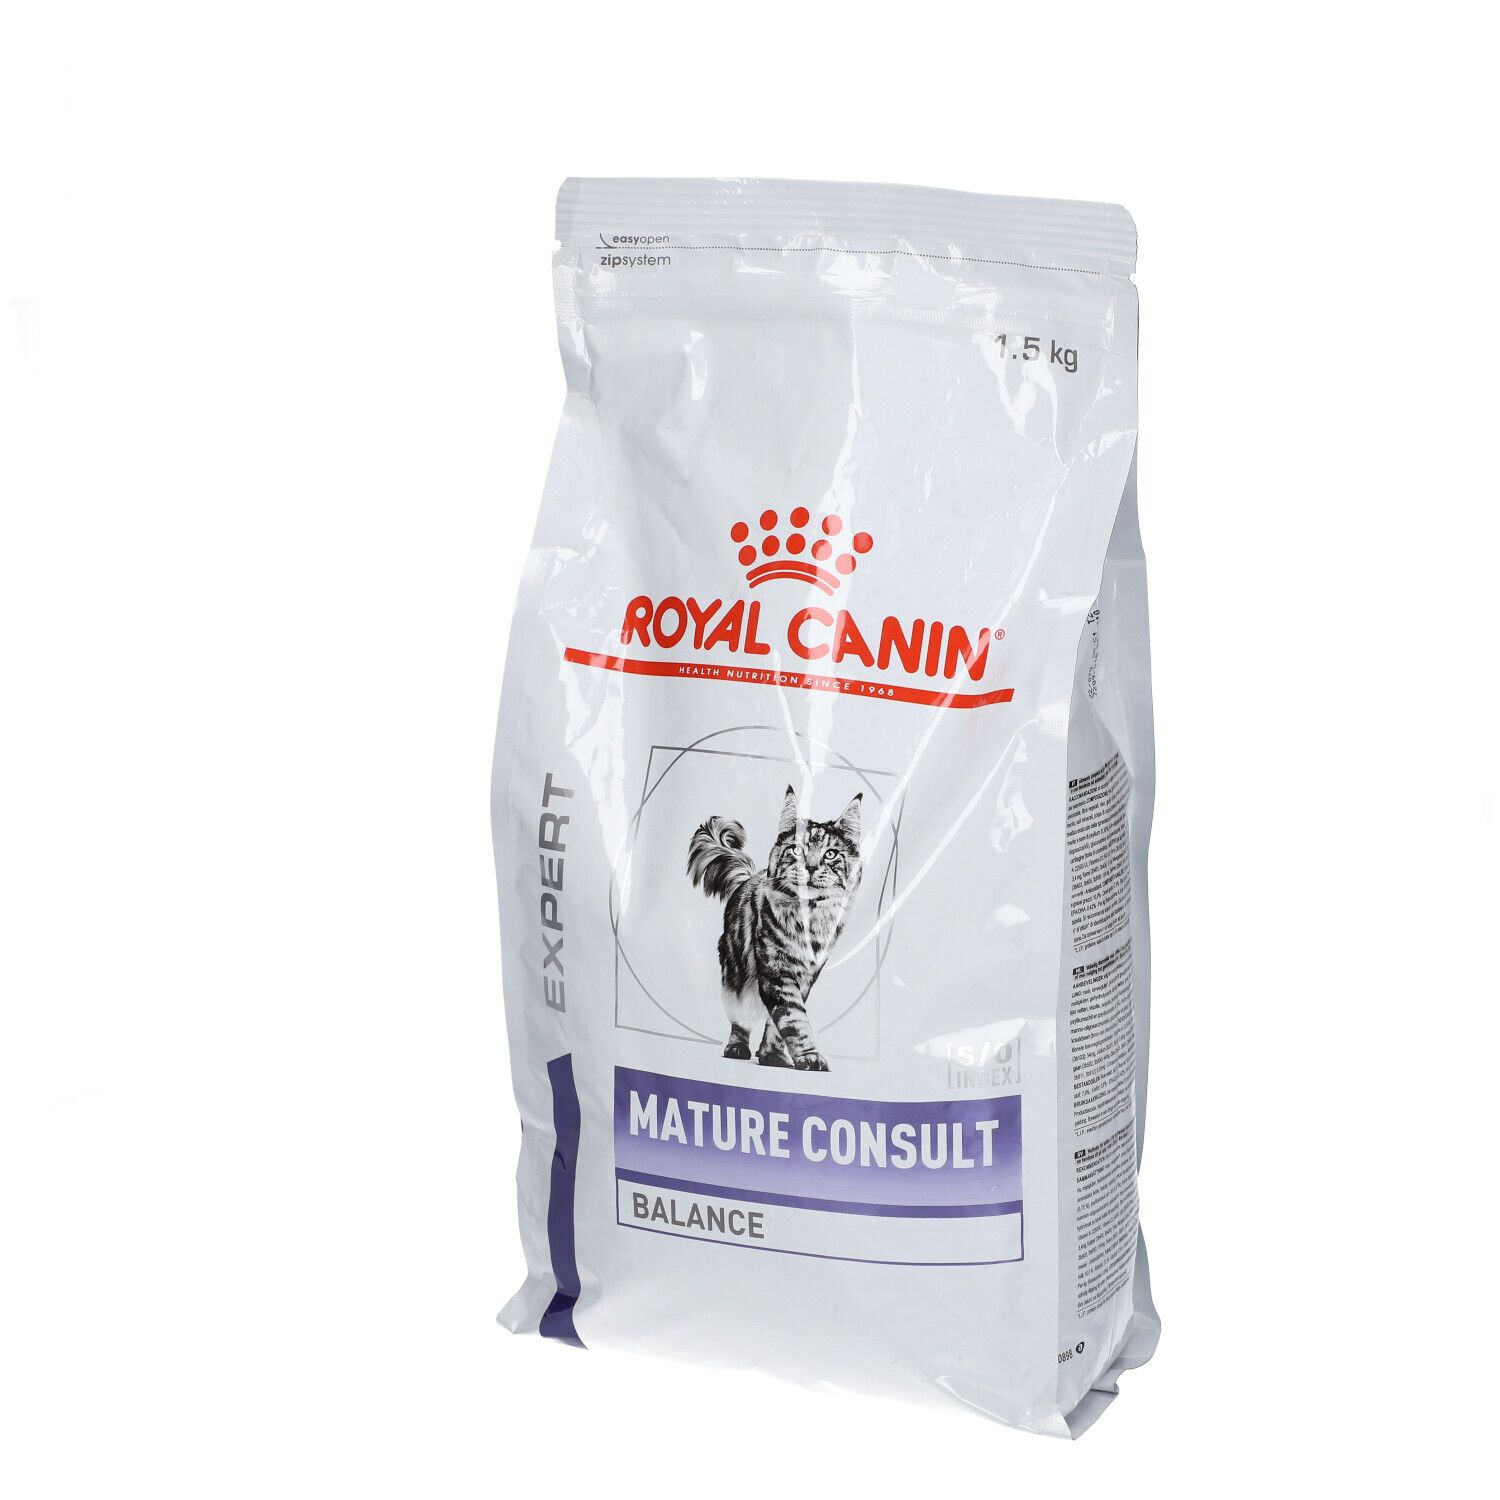 ROYAL CANIN® Urinary S/O Chat 3500 g - Redcare Pharmacie